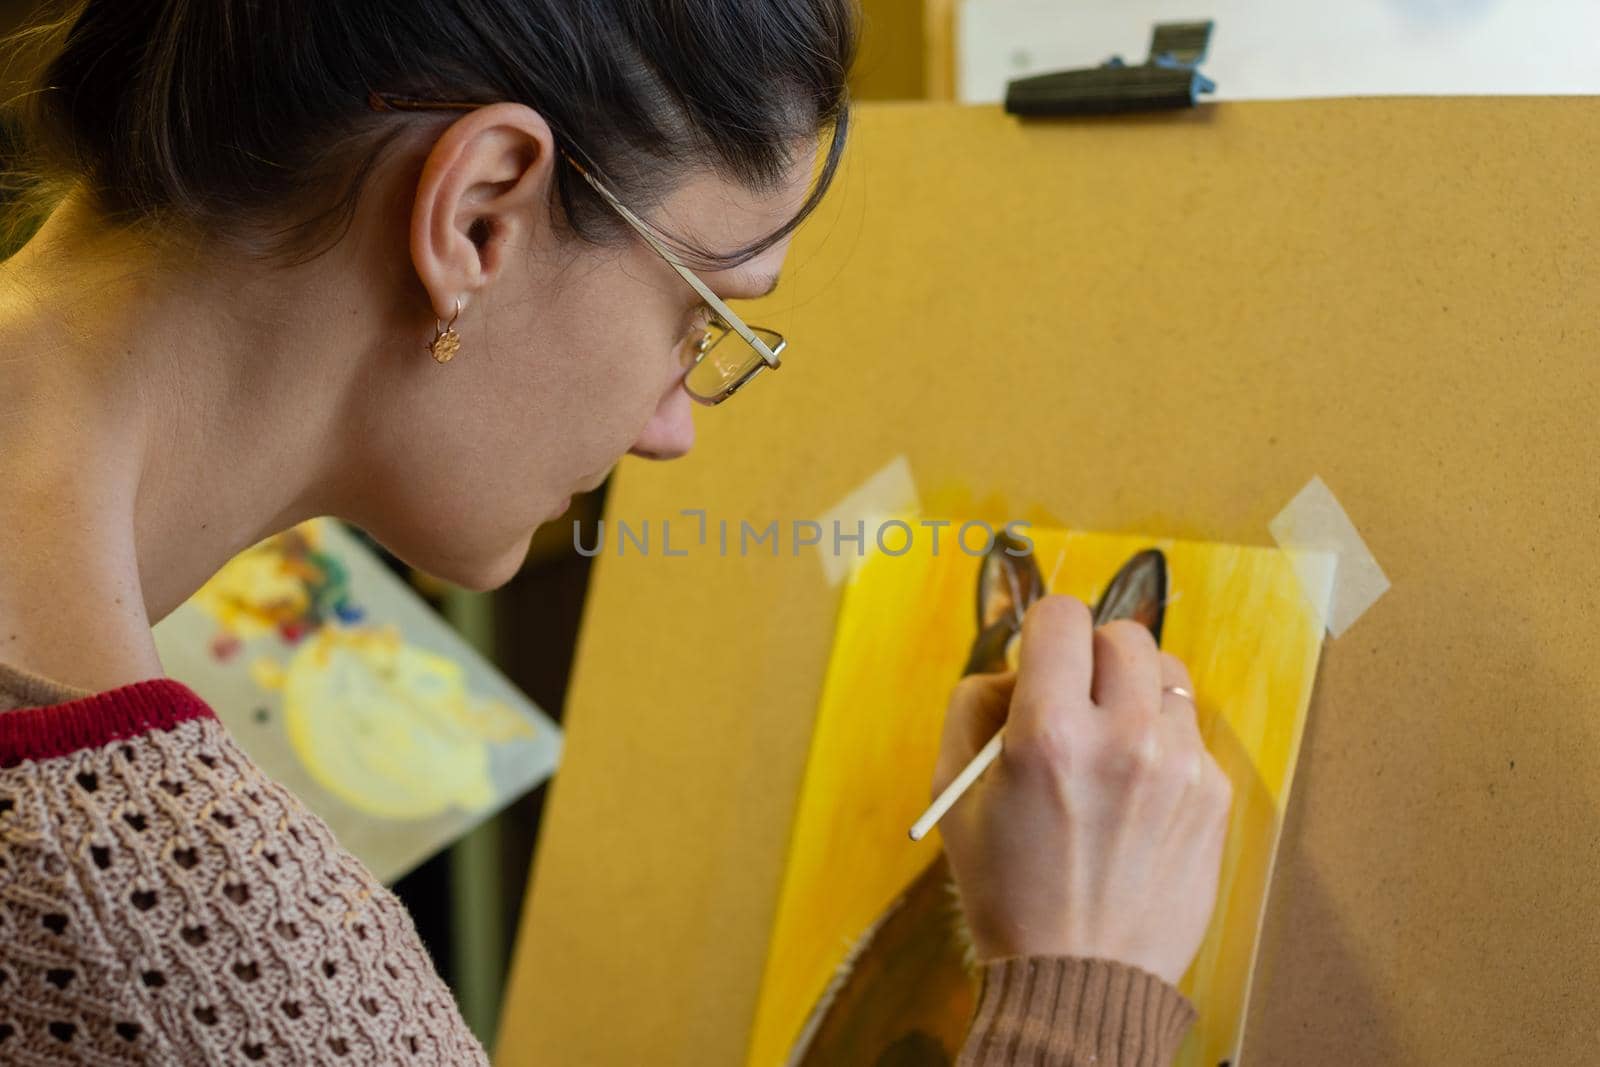 The artist draws a drawing on an easel, side view, close-up